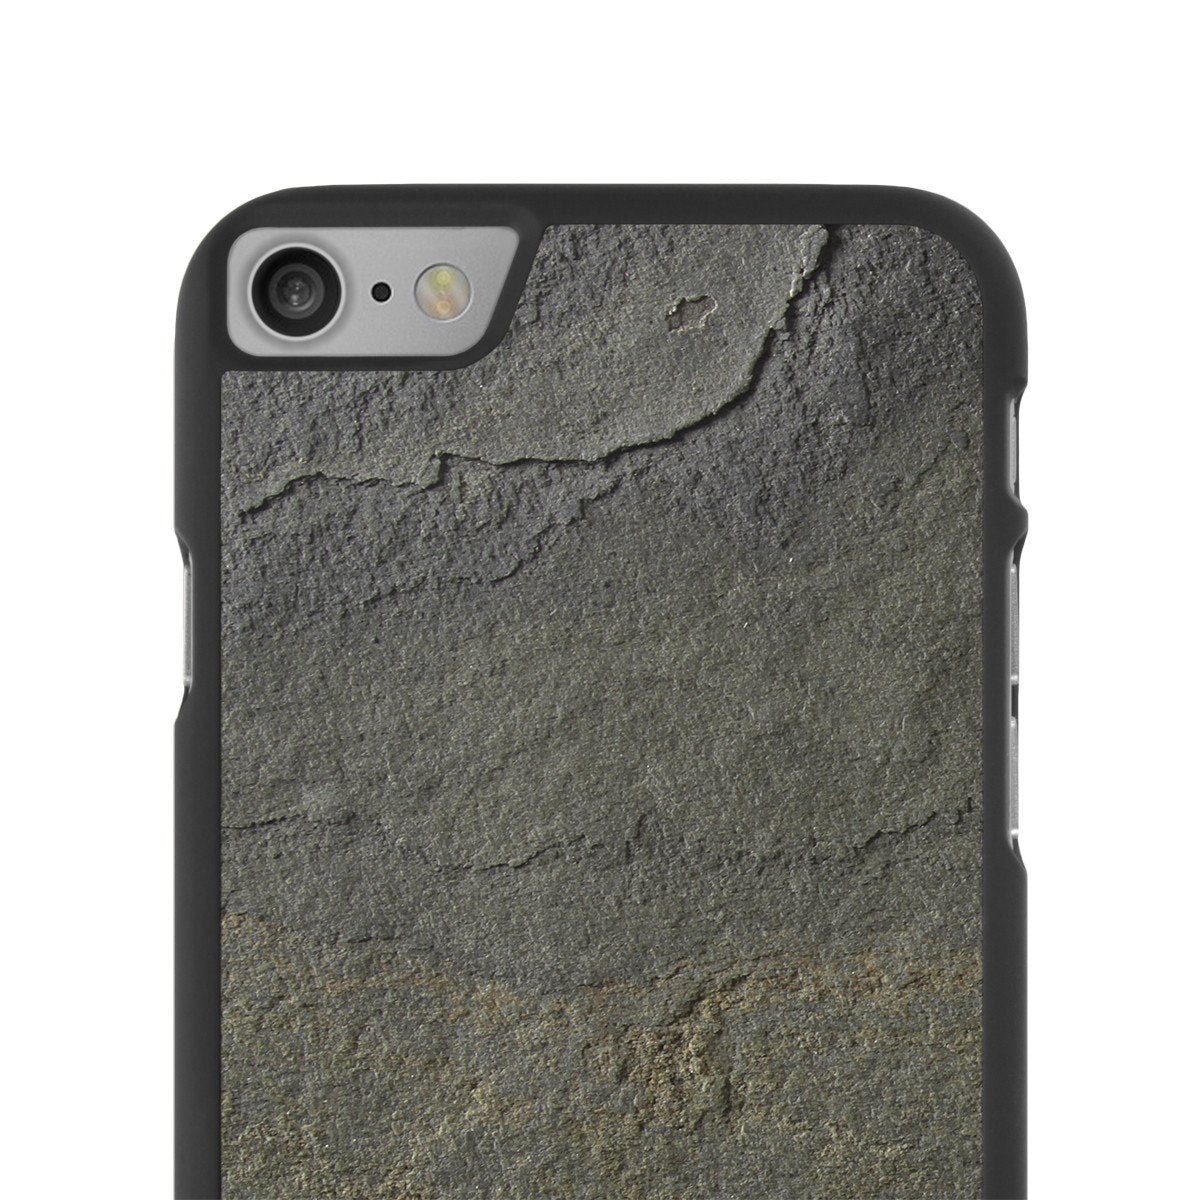  iPhone 7 —  Stone Snap Case - Cover-Up - 4